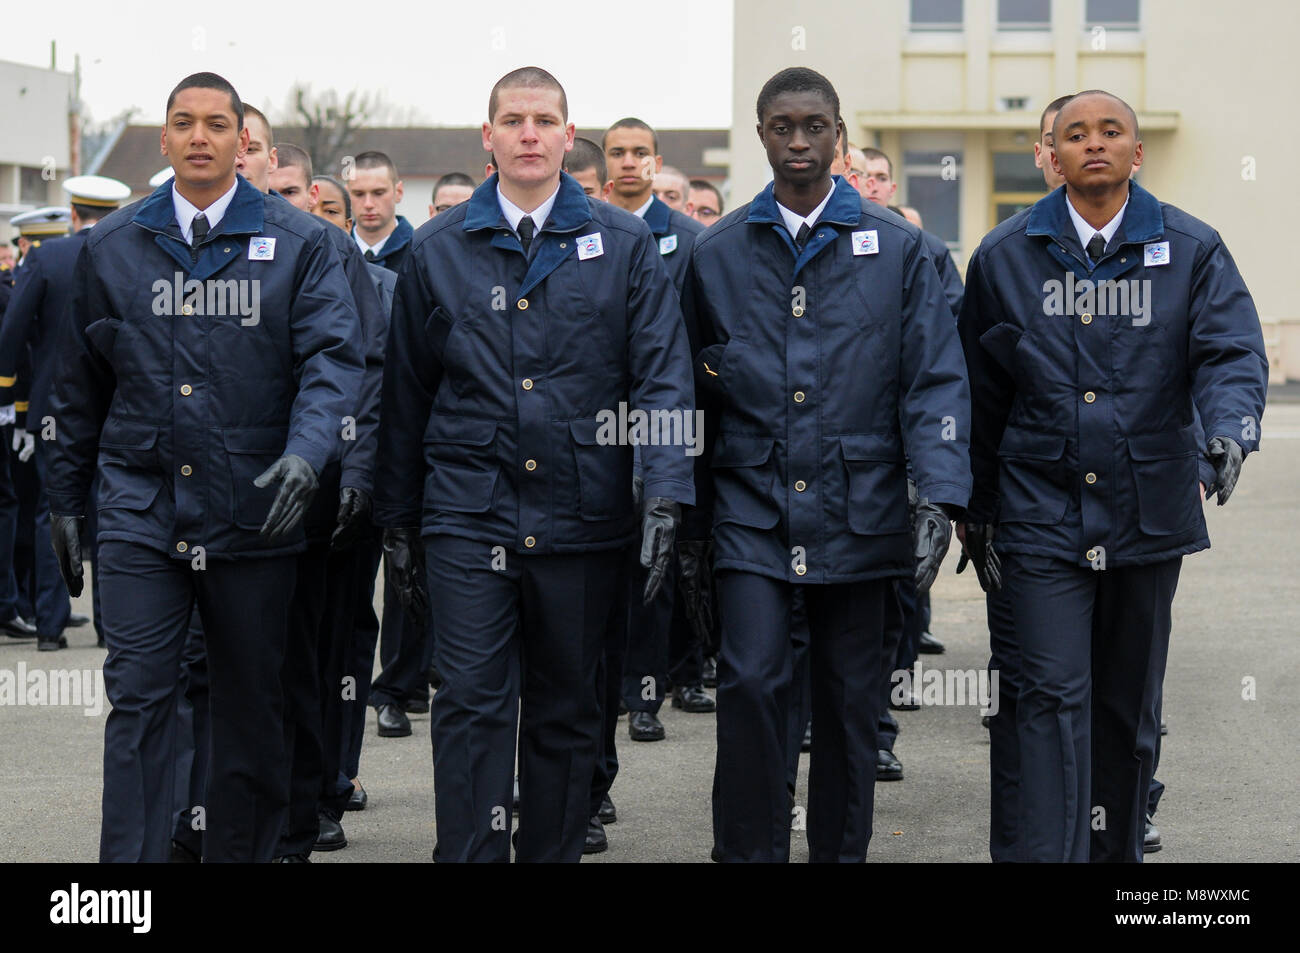 Amberieu-en-Bugey, France, 20th March 2018: Young volunteers for Military service (CSMV) are seen at Air Detachment 278 Base, in Amberieu-en-Bugey (Central-Eastern France), on March 20, 2018, as they receive military calot on the occasion of a symbolic ceremony paying homage to their engagement. The CSMV (Voluntary Military Service Center) of Amberieu-en-Bugey launched for the year 2018 a large campaign of recruitment. These young people, alienated from the workplace, will receive human,  behavioral and citizenship and training that will make them ready to integrate jobs in emplyment sectors l Stock Photo